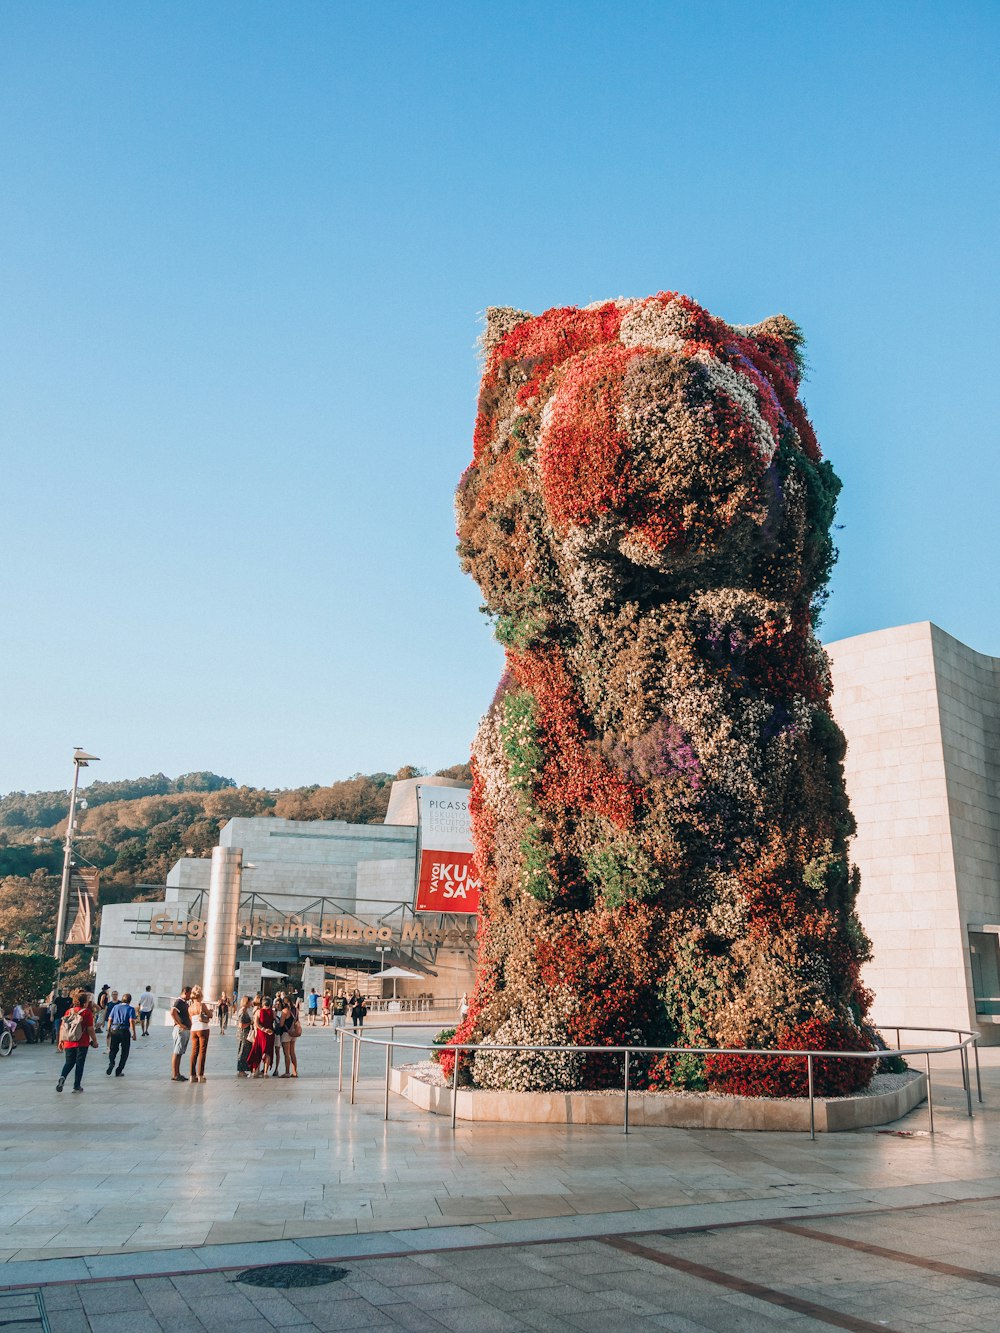 a giant bear made out of flowers in a plaza